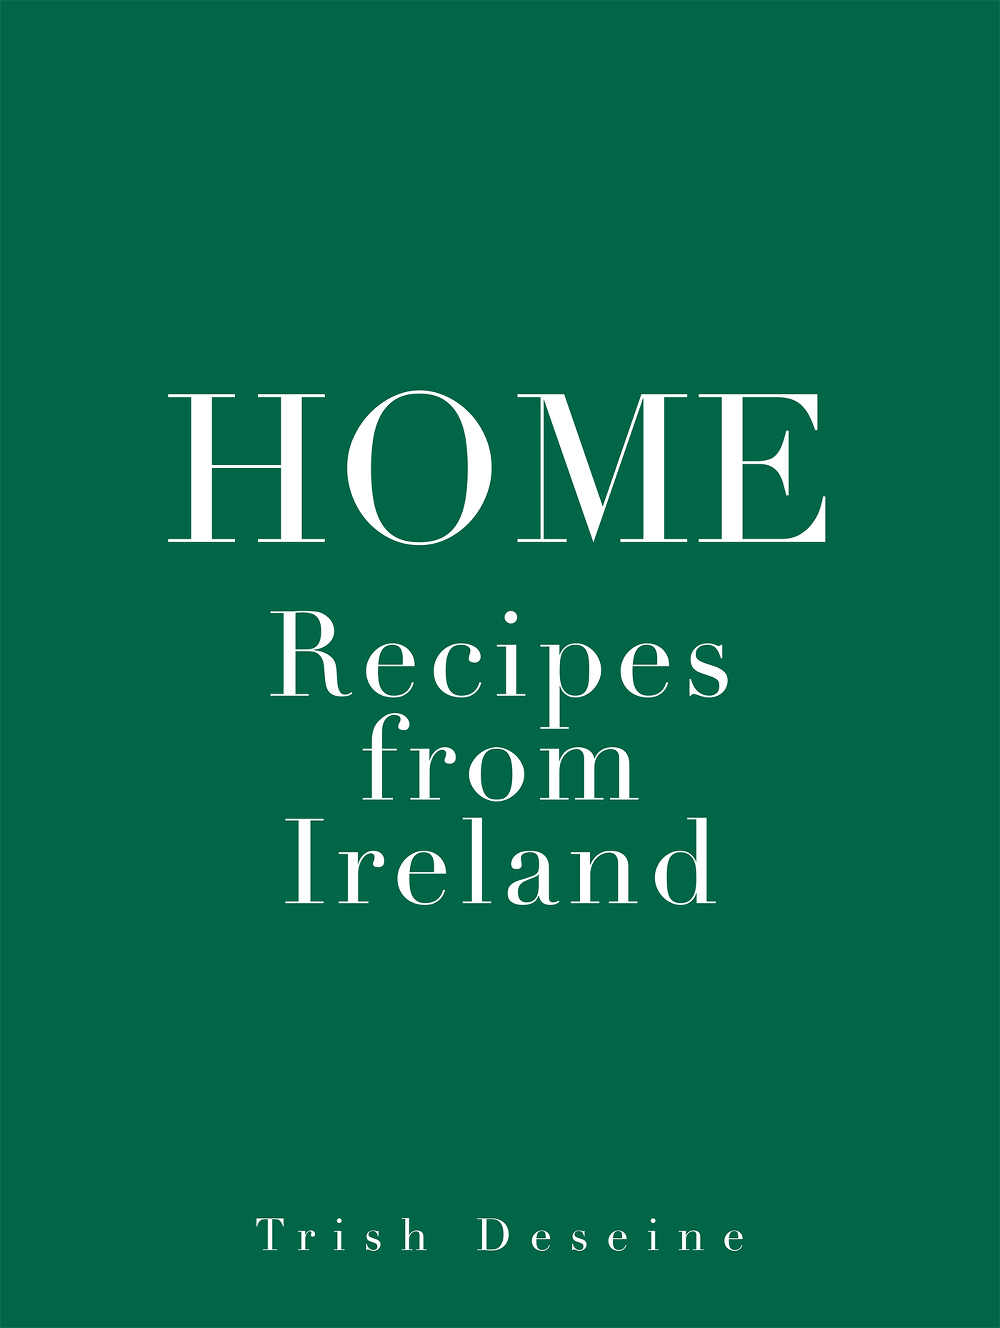 HOME: Recipes from Ireland by Trish Deseine (Hachette Cuisine; hardback, 356pp; photography by Deirdre Rooney; €29)